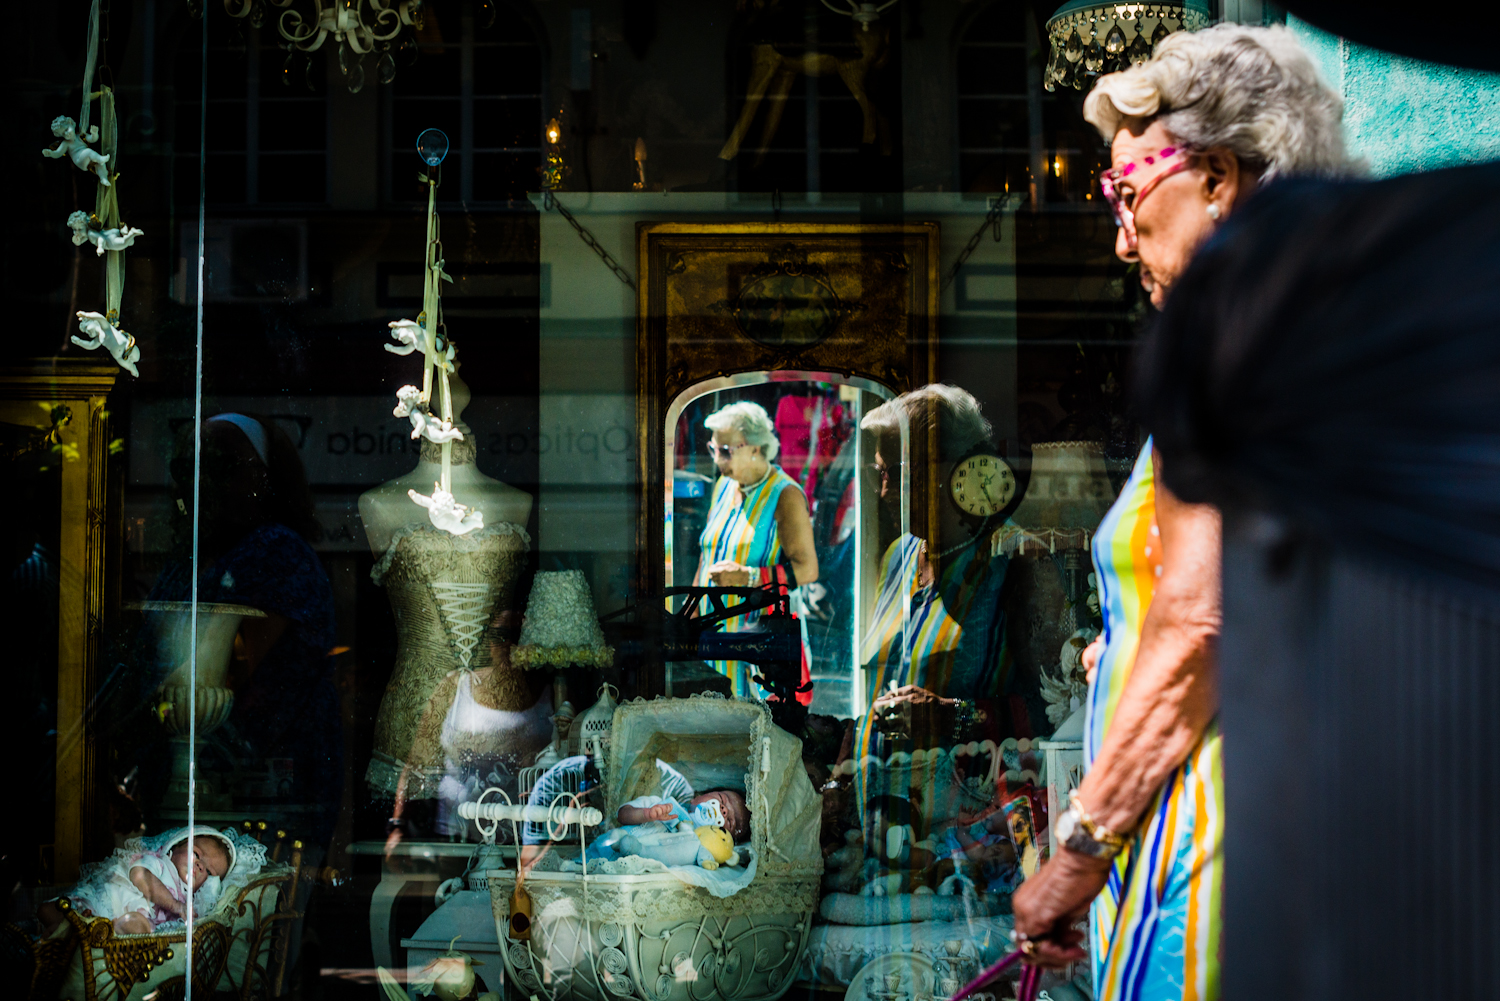 The Lady, her reflections, and Conjunction of Elements in a Window, Spain, 2016